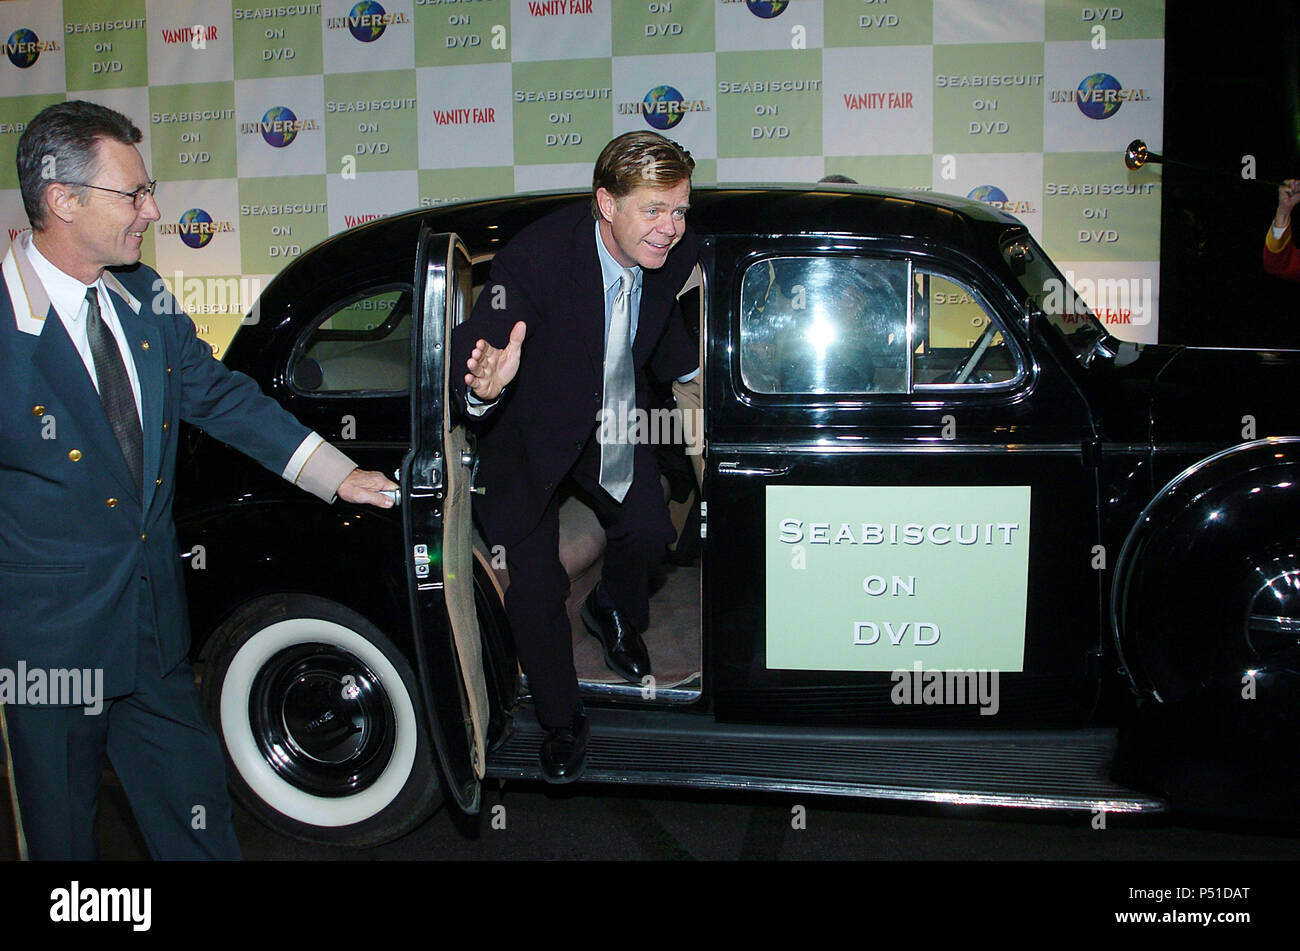 William H Macy at the party to celebrate the release of ' Seabiscuit ' on DVD at the Beverly Hills Hotel in Los angeles. December 15, 2003.MacyWilliamH25 Red Carpet Event, Vertical, USA, Film Industry, Celebrities,  Photography, Bestof, Arts Culture and Entertainment, Topix Celebrities fashion /  Vertical, Best of, Event in Hollywood Life - California,  Red Carpet and backstage, USA, Film Industry, Celebrities,  movie celebrities, TV celebrities, Music celebrities, Photography, Bestof, Arts Culture and Entertainment,  Topix, vertical, one person,, from the years , 2003 to 2005, inquiry tsuni@G Stock Photo